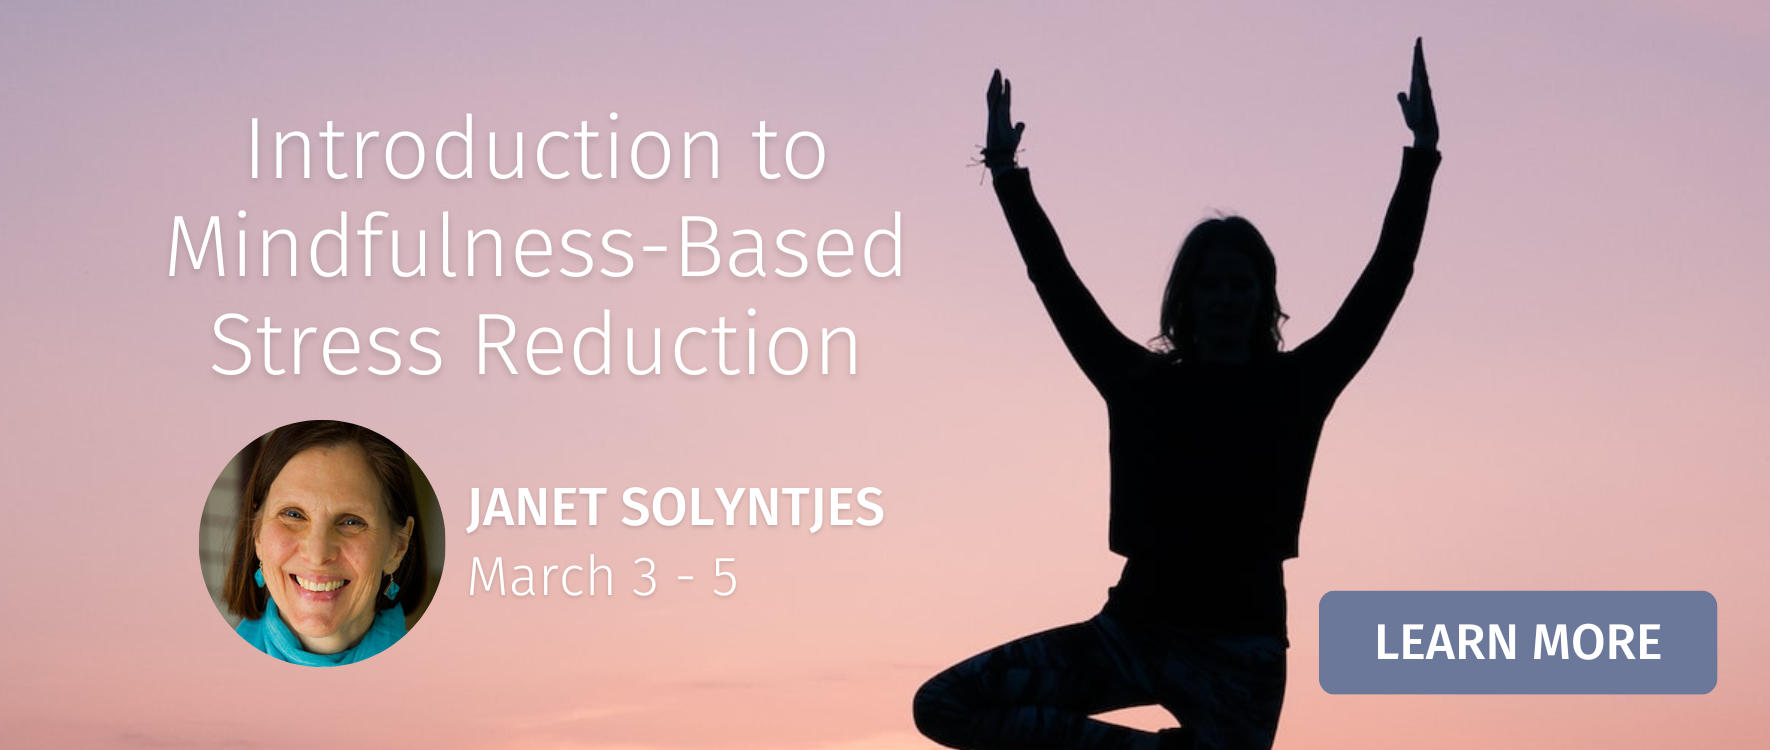 Introduction to Mindfulness-Based Stress Reduction, March 3-5, 2023